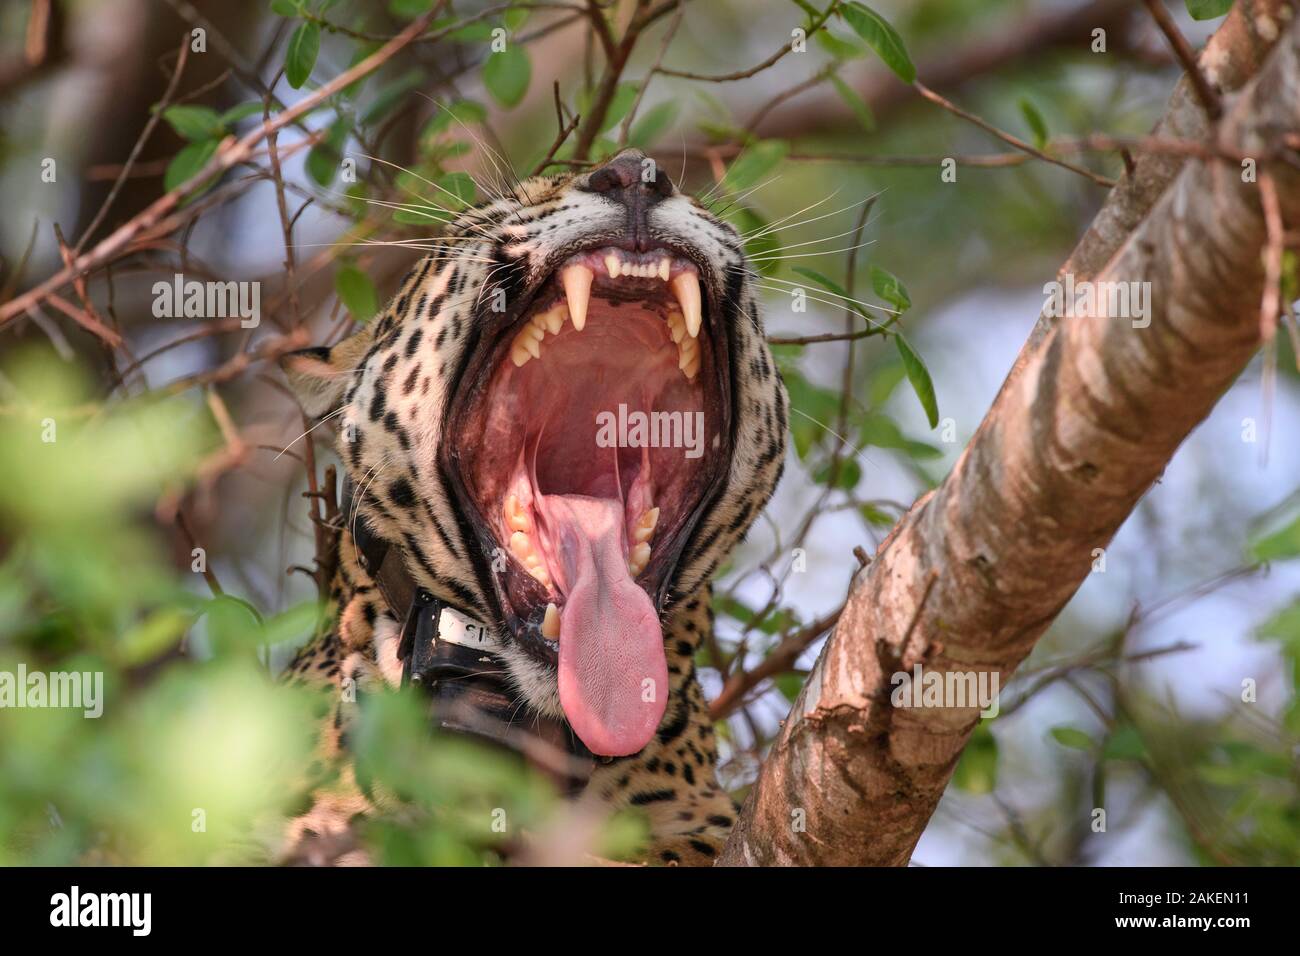 Jaguar (Panthera onca palustris) female yawning with mouth wide open, wearing Oncafari Project radio collar. Caiman Lodge, southern Pantanal, Mato Grosso do Sul, Brazil. September 2017. Stock Photo